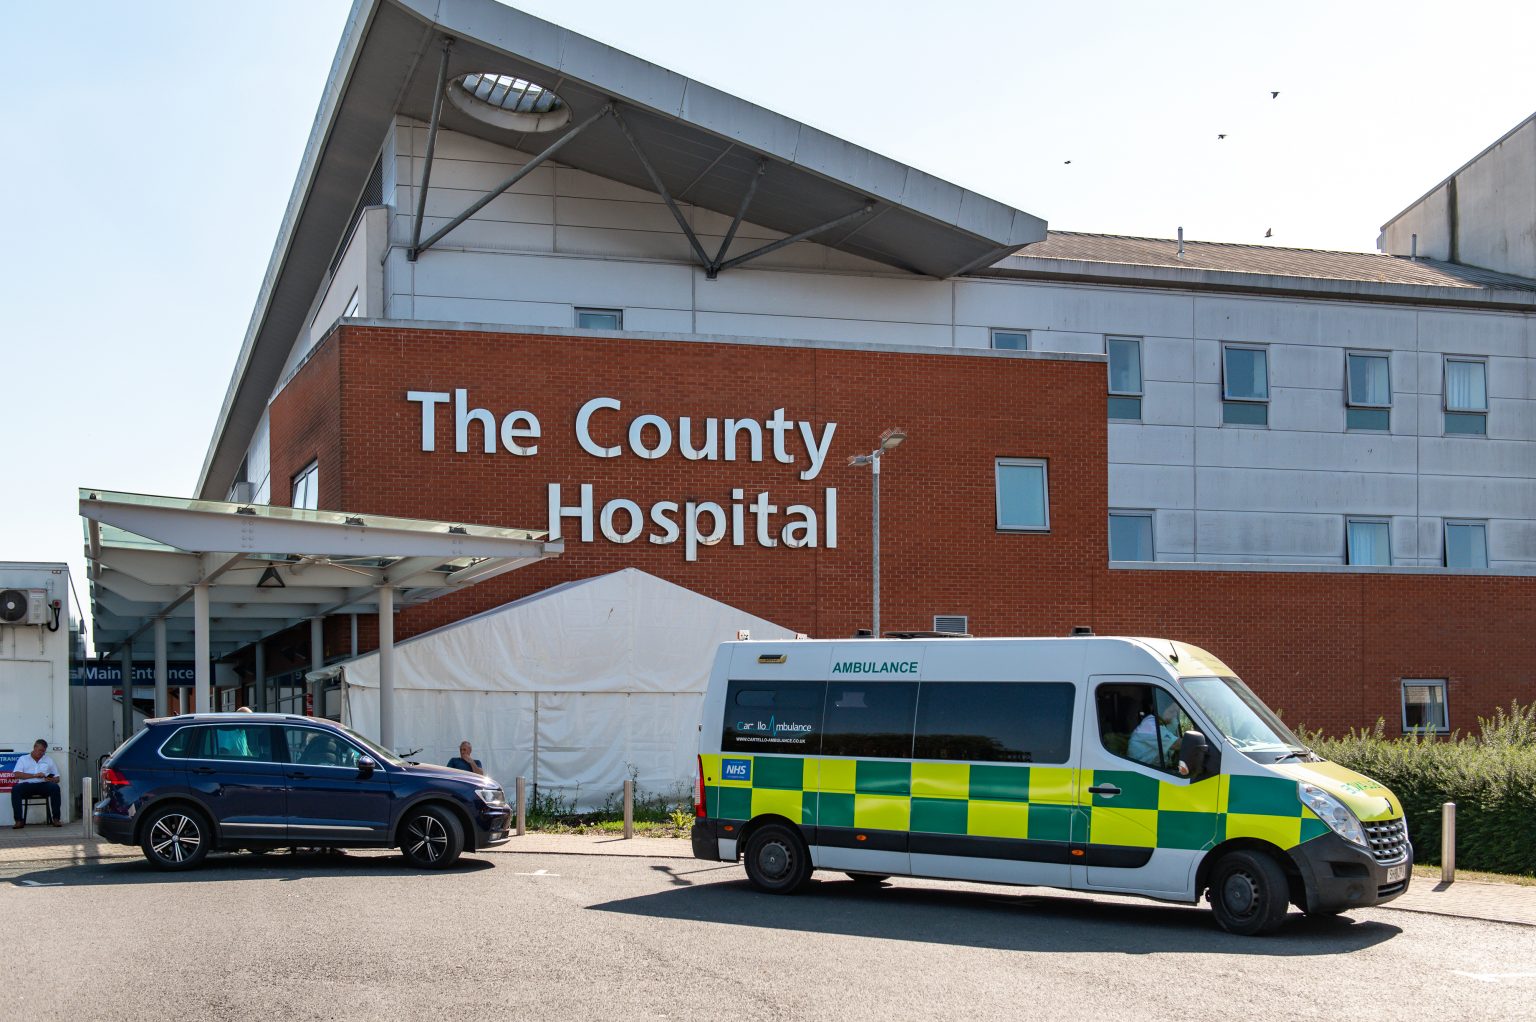 NEWS | Increasing number of patients testing positive for COVID-19 at hospital in Herefordshire